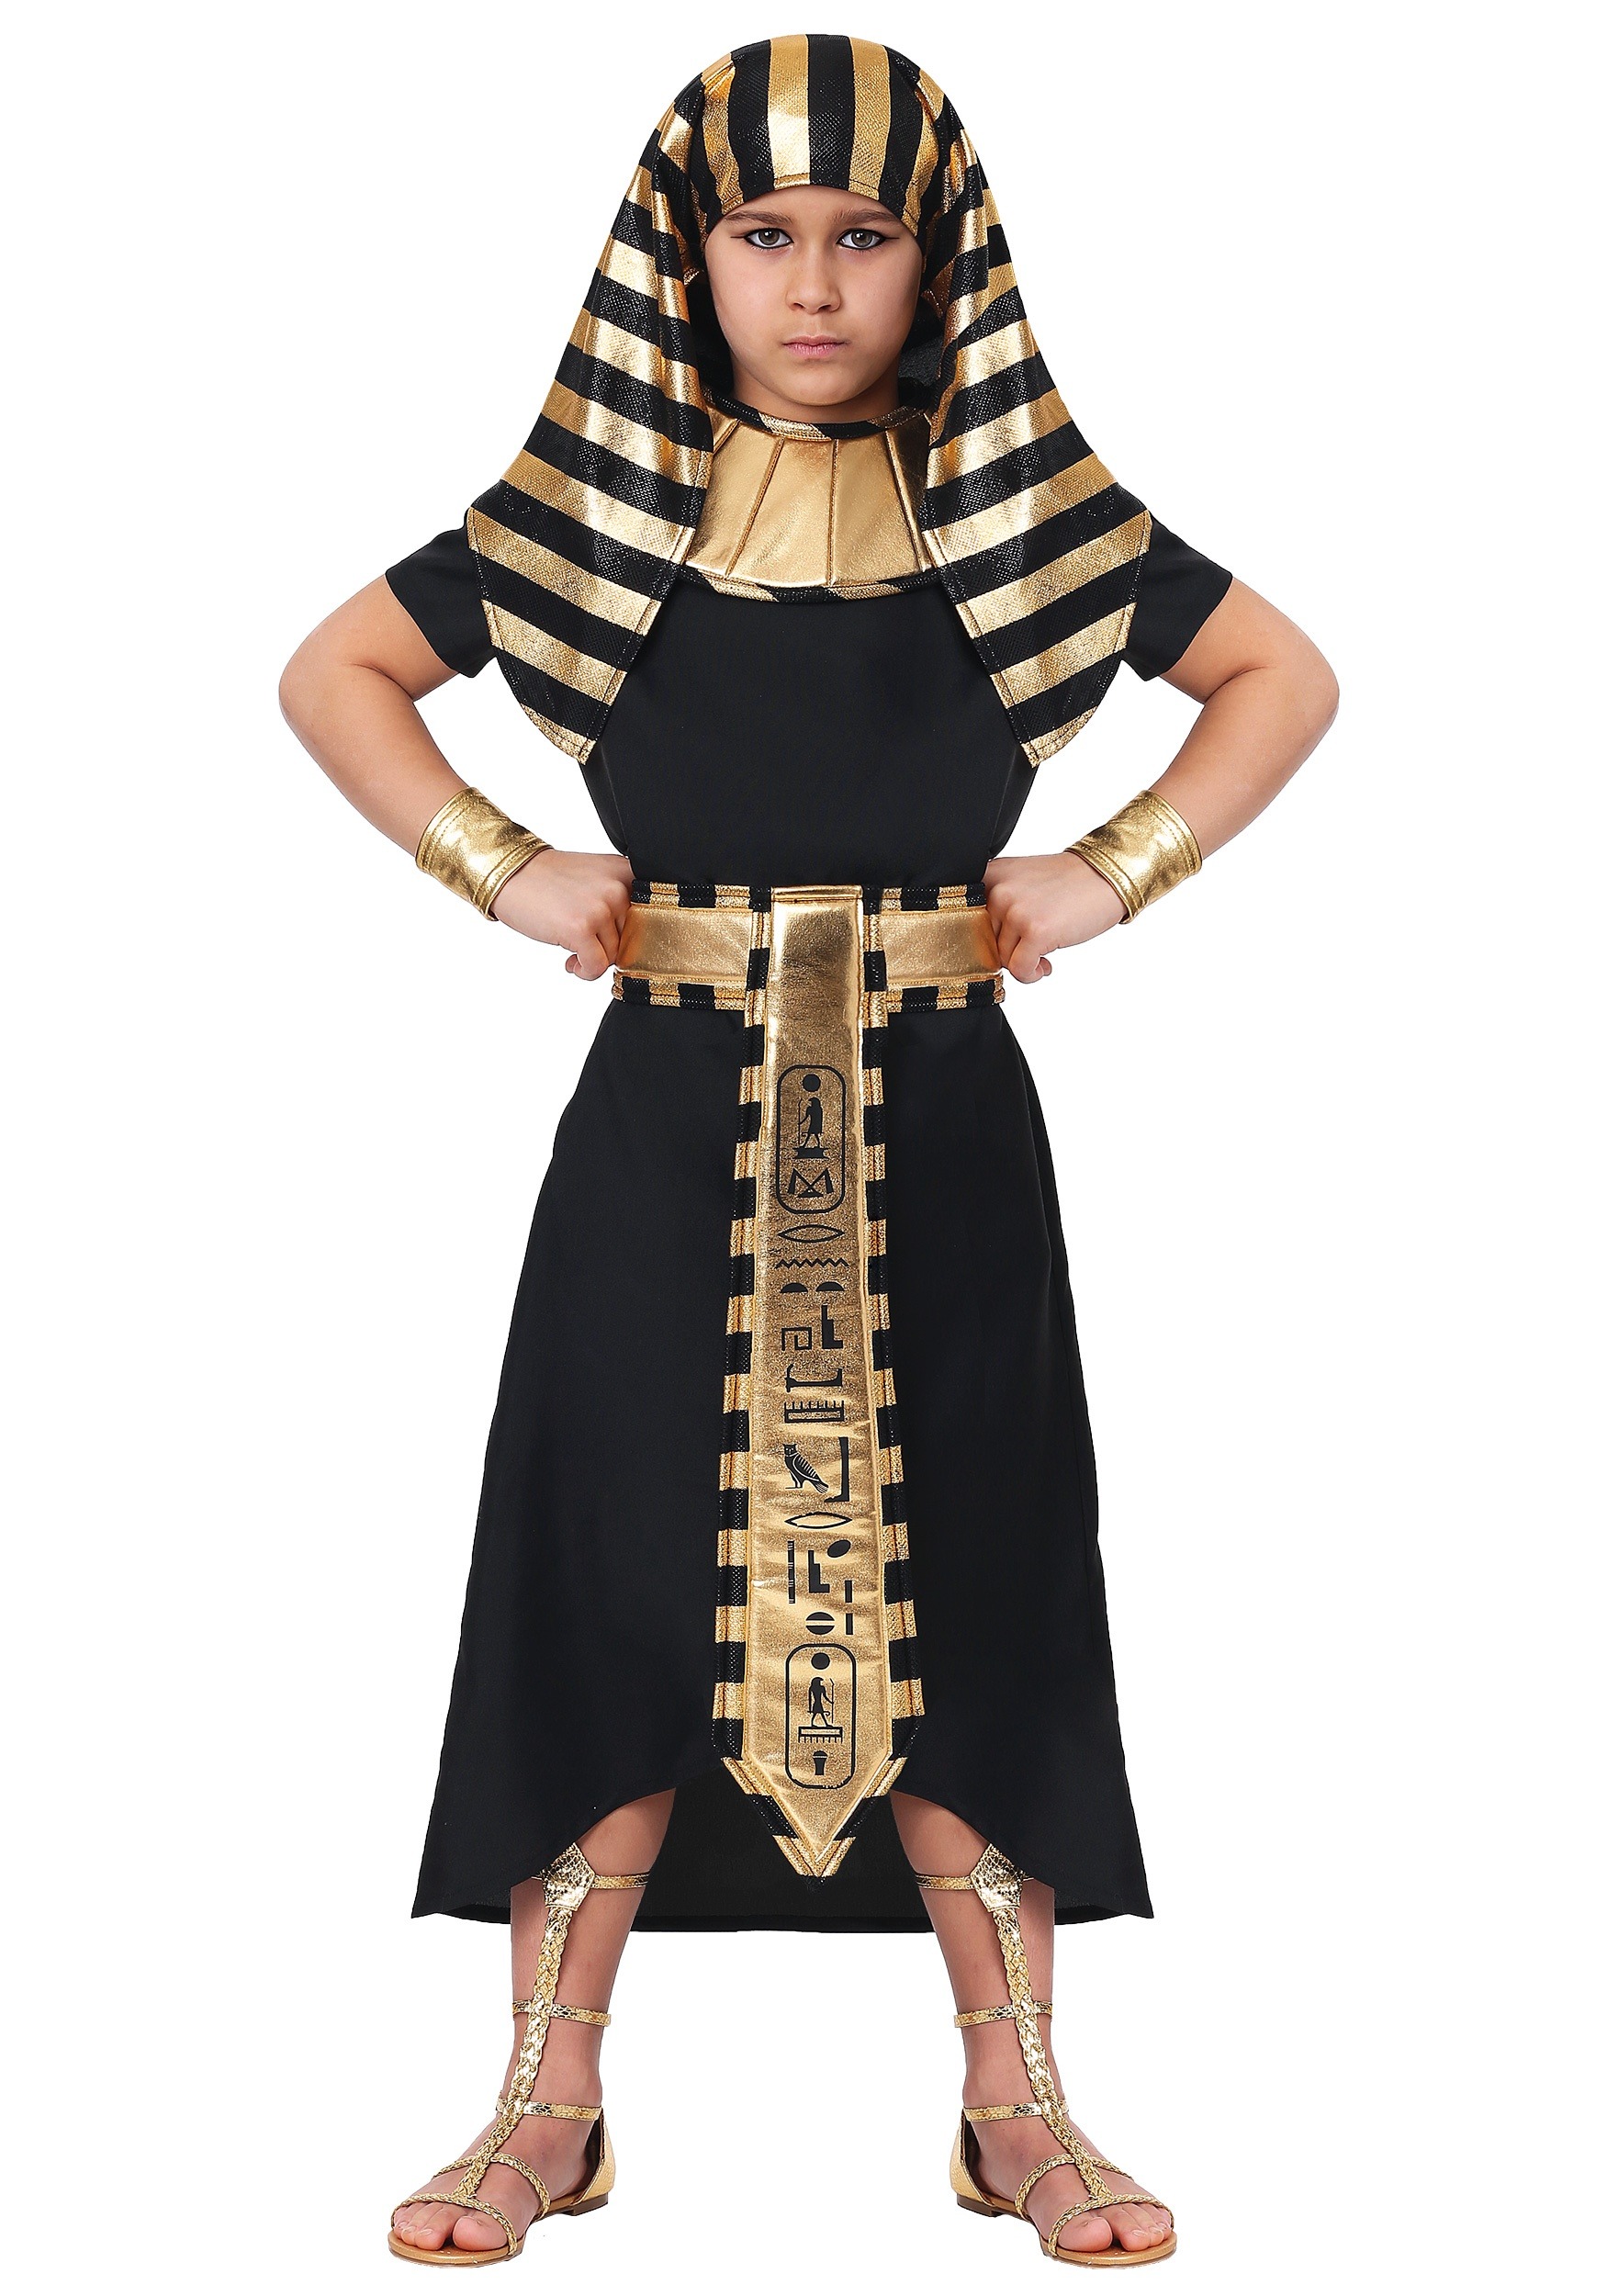 Photos - Fancy Dress FUN Costumes Egyptian Pharaoh Costume for Boys | Historical Costumes Black